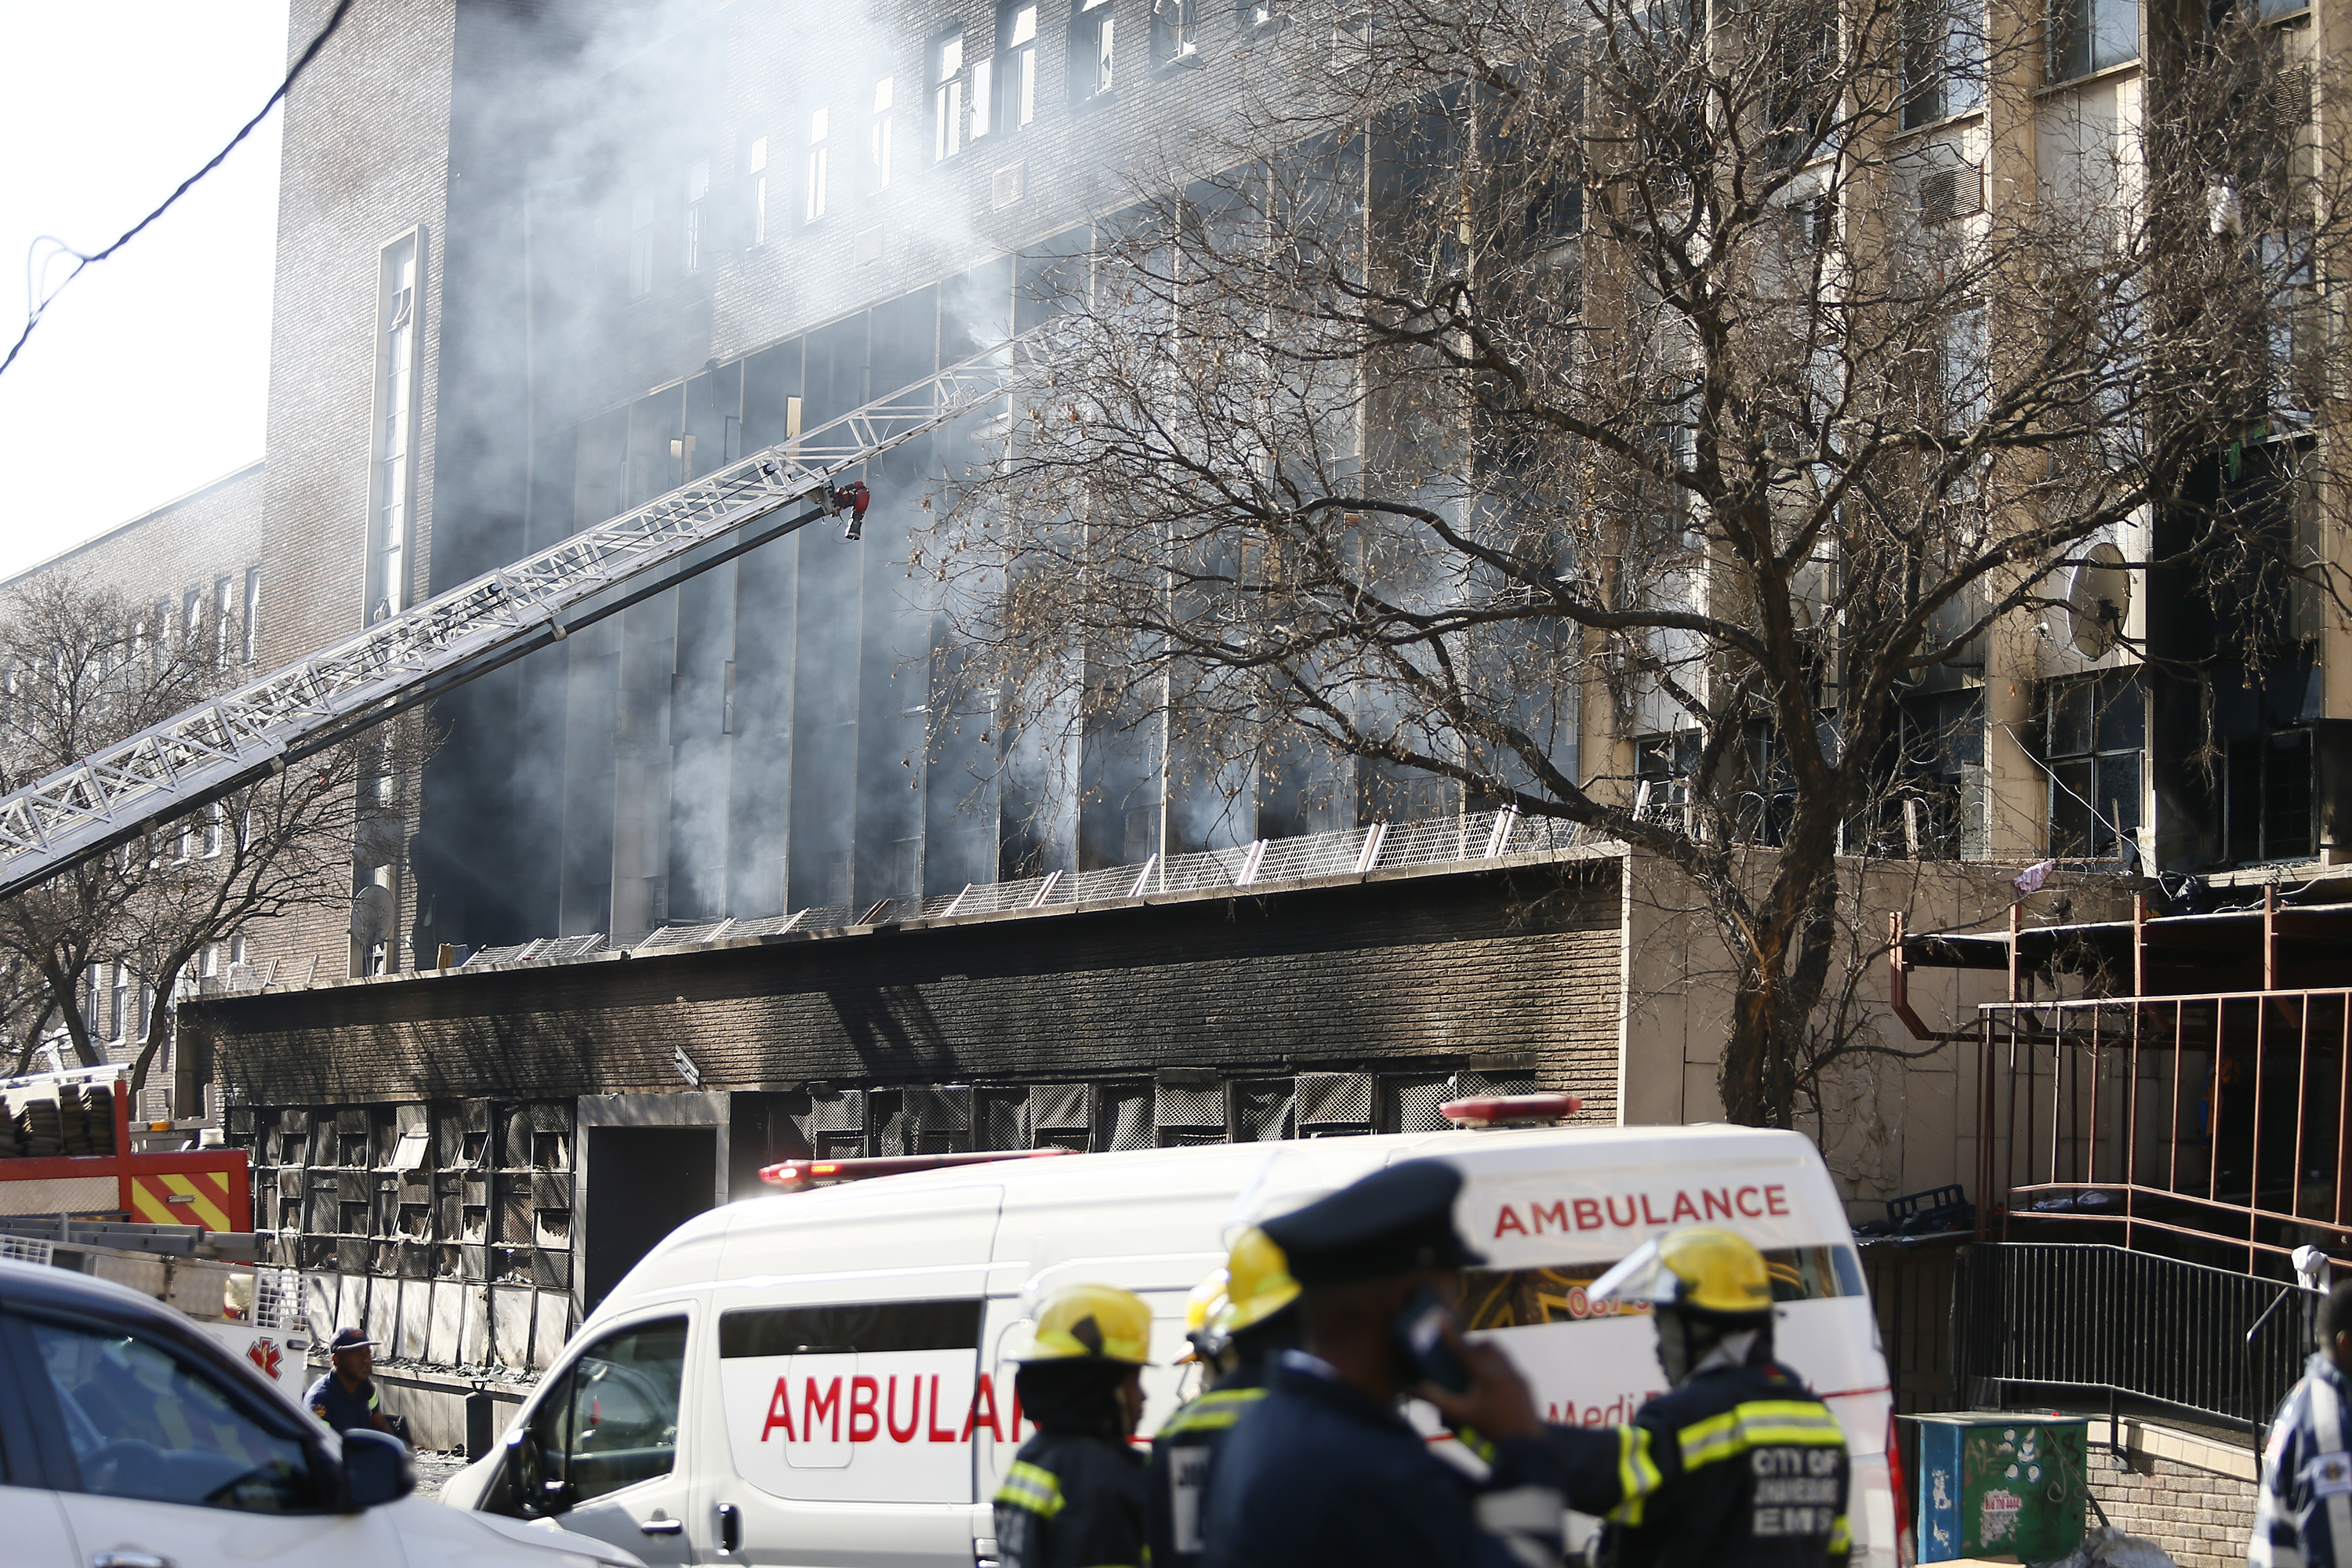 A devastating fire ripped through a Johannesburg inner city building around 1.30am on Thursday, leaving in its wake at least 73 dead and 55 injured, including children and babies. Felix Dlangamandla captured the early morning scenes.